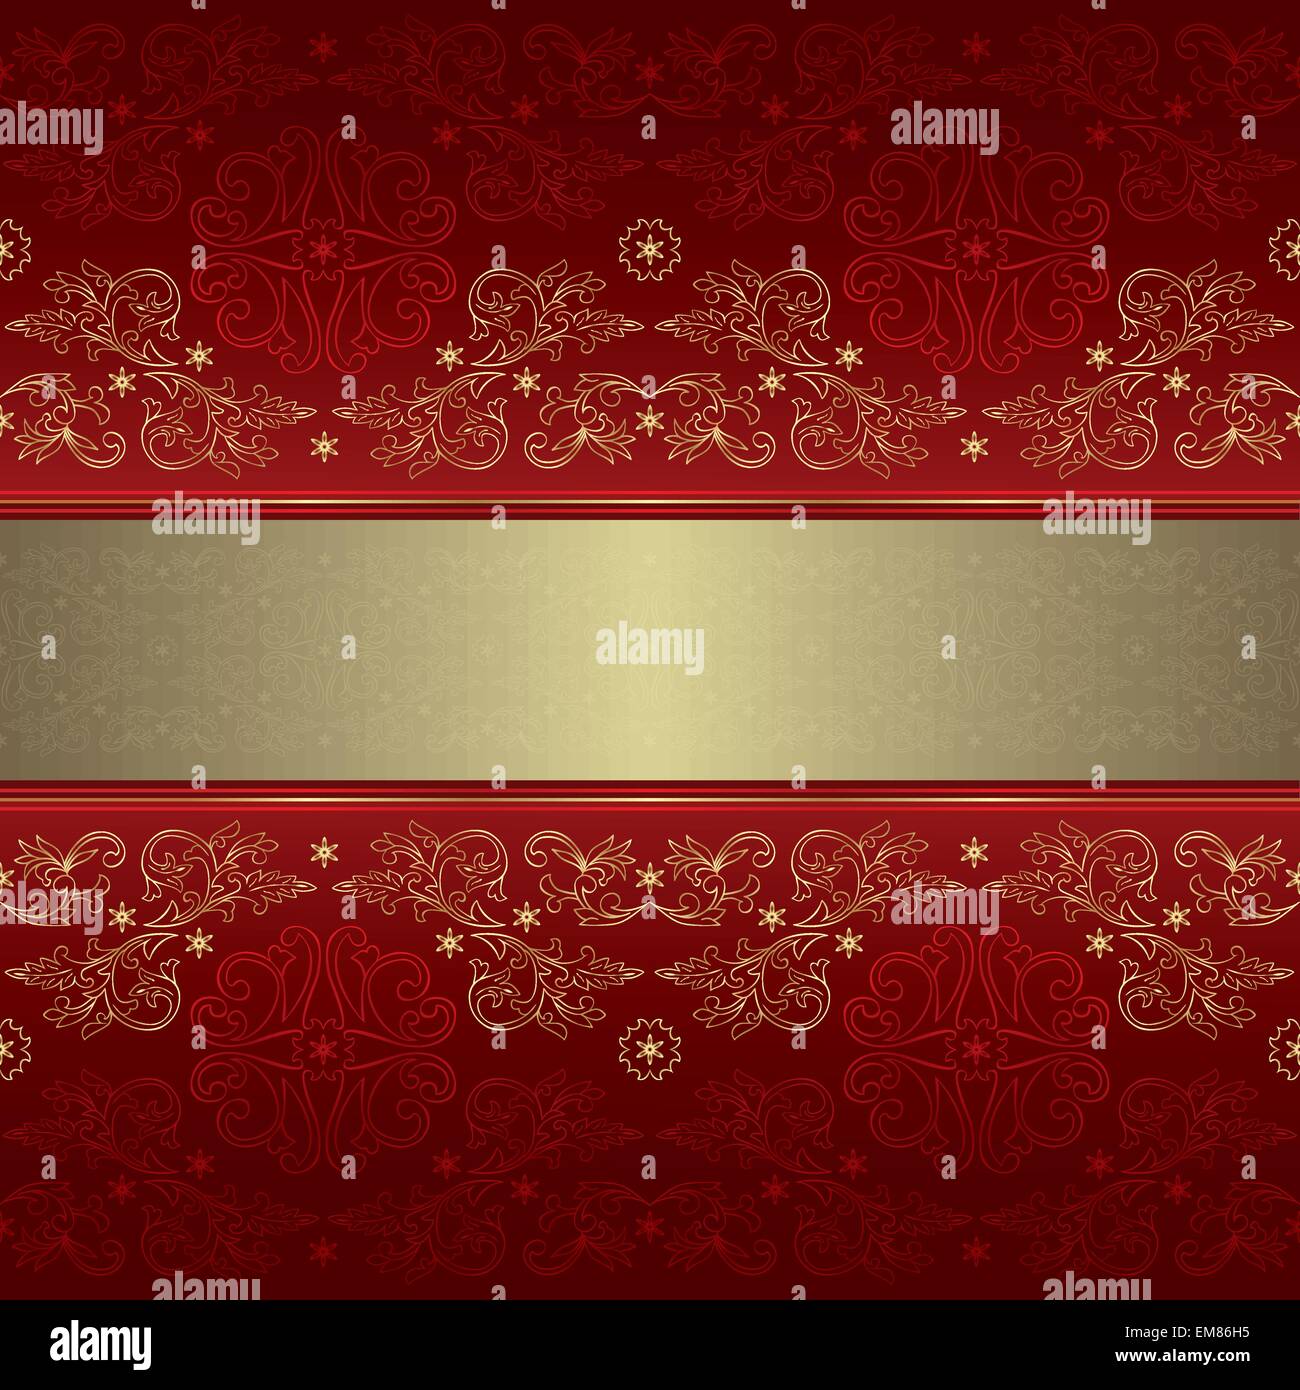 Template with ornate floral seamless pattern on a red background Stock Vector